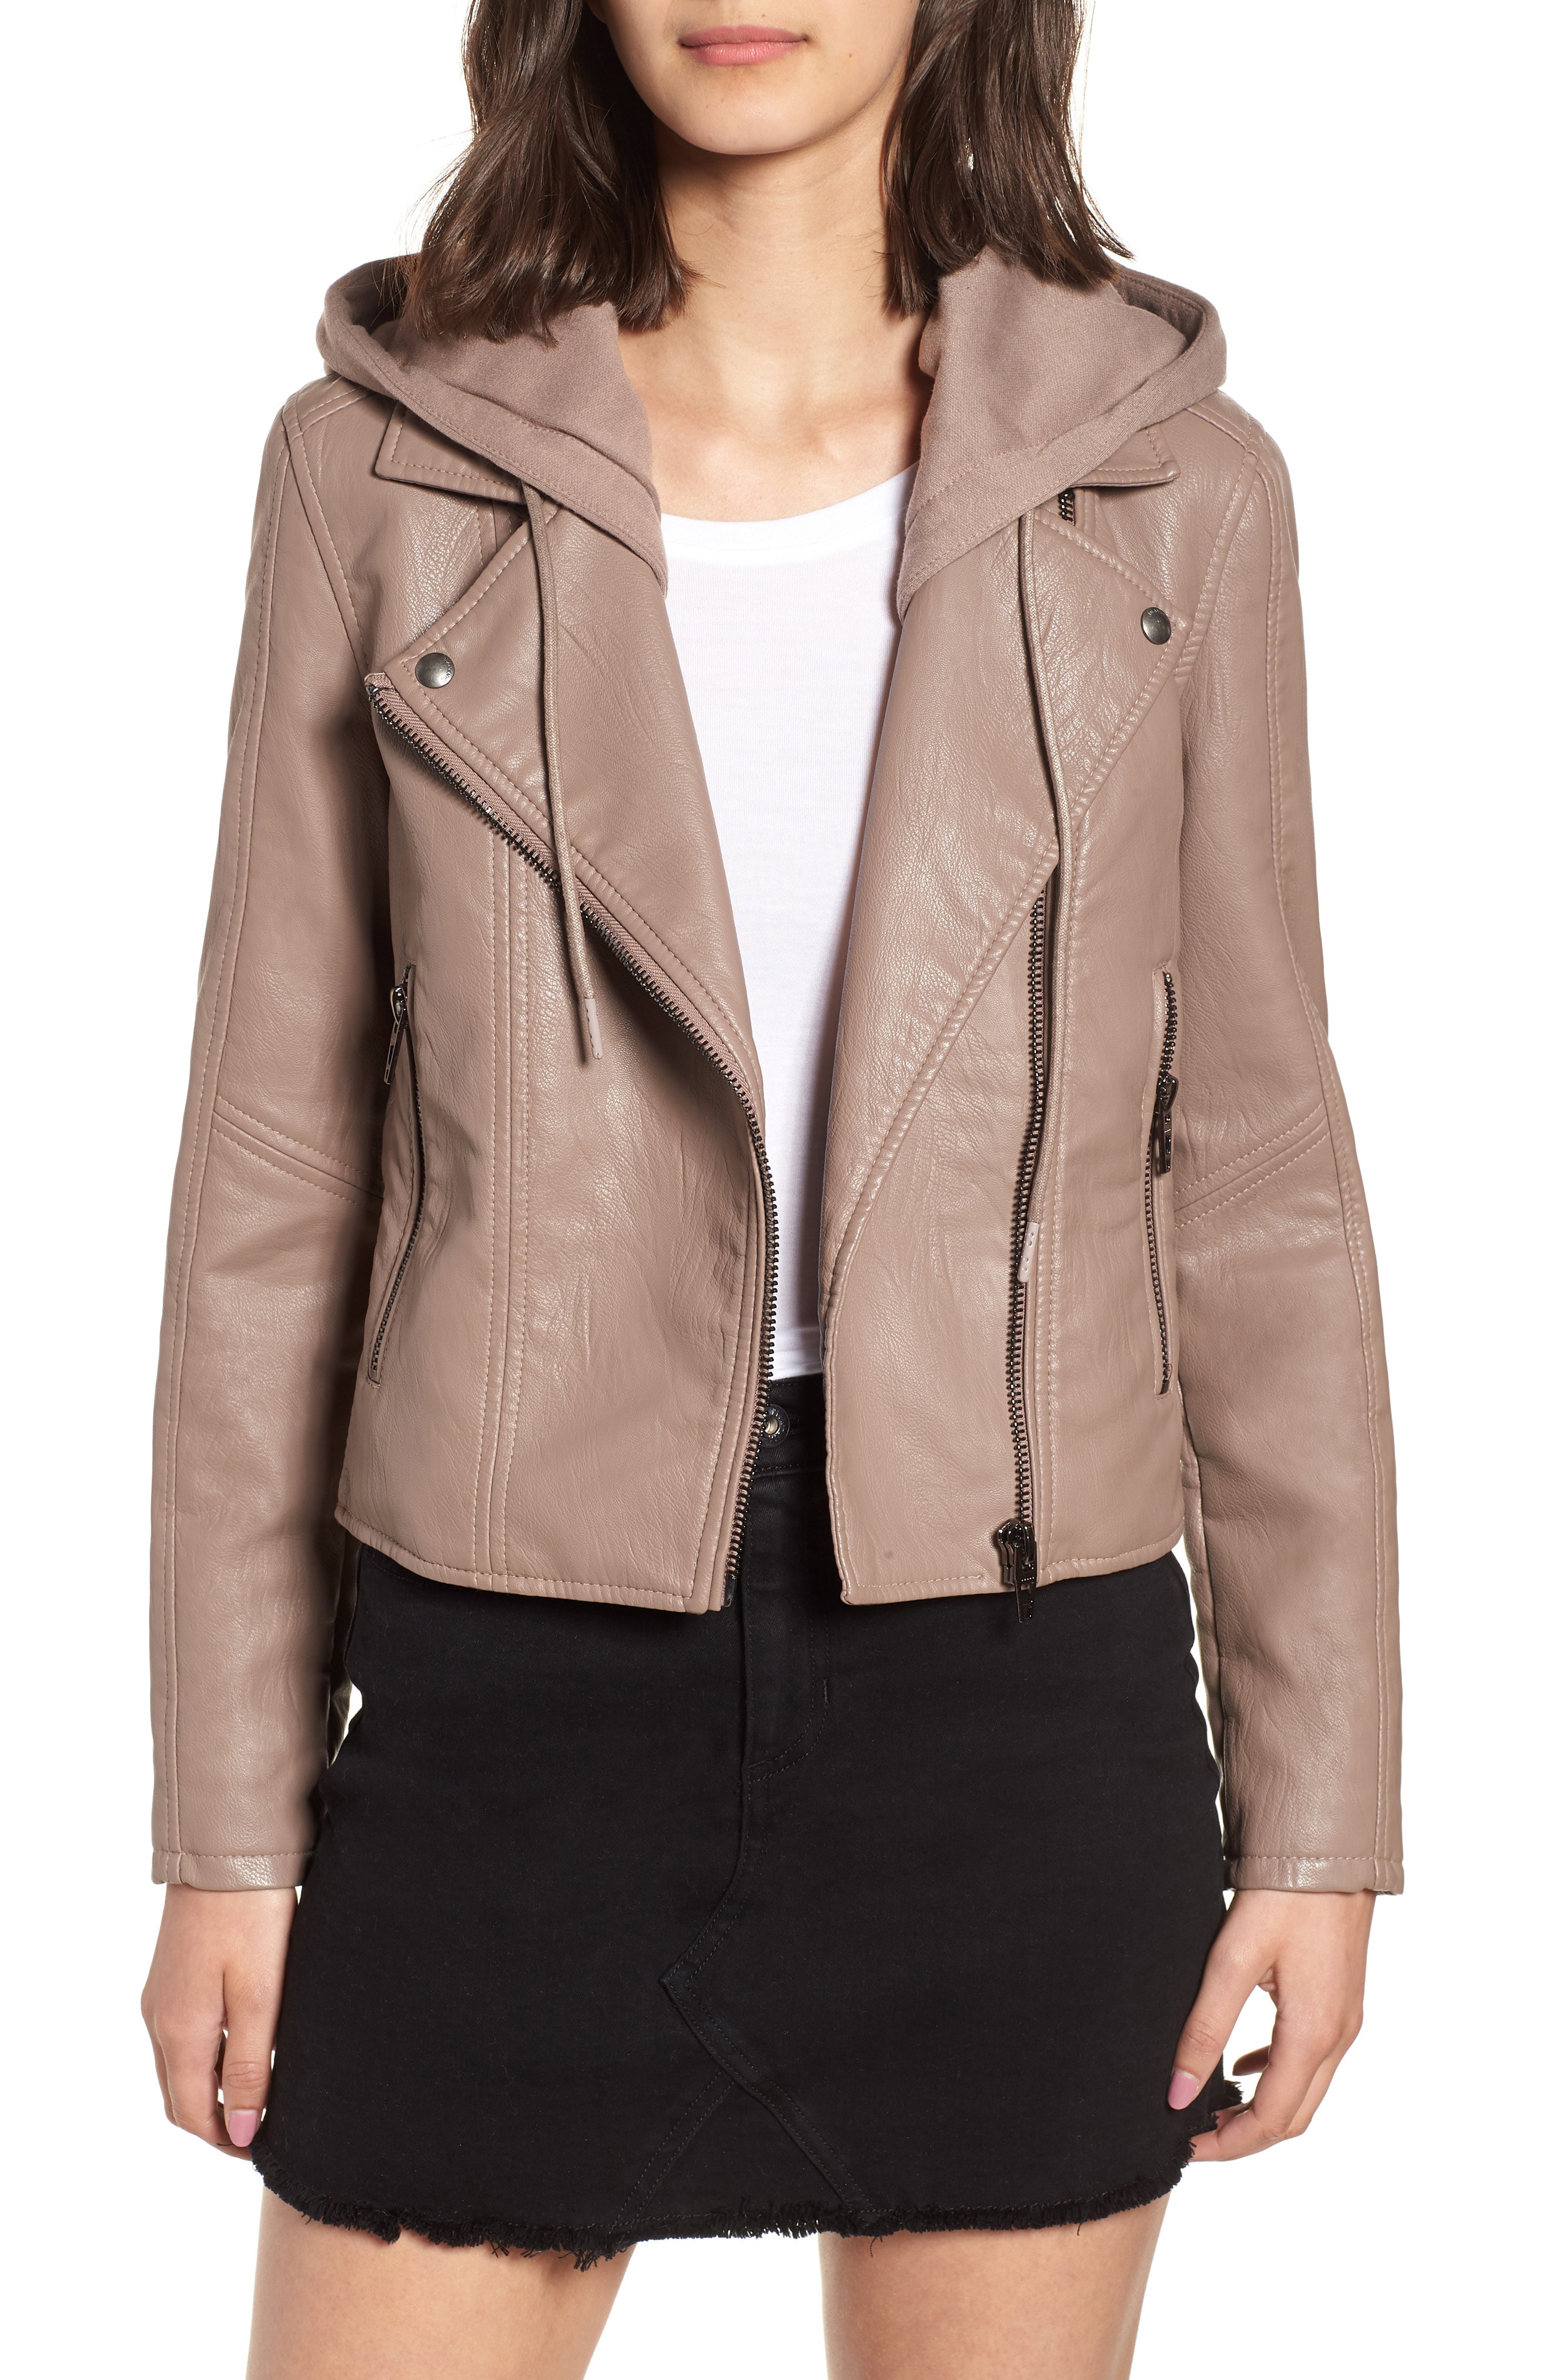 Women's Leather & Faux Leather Coats & Jackets | Nordstrom